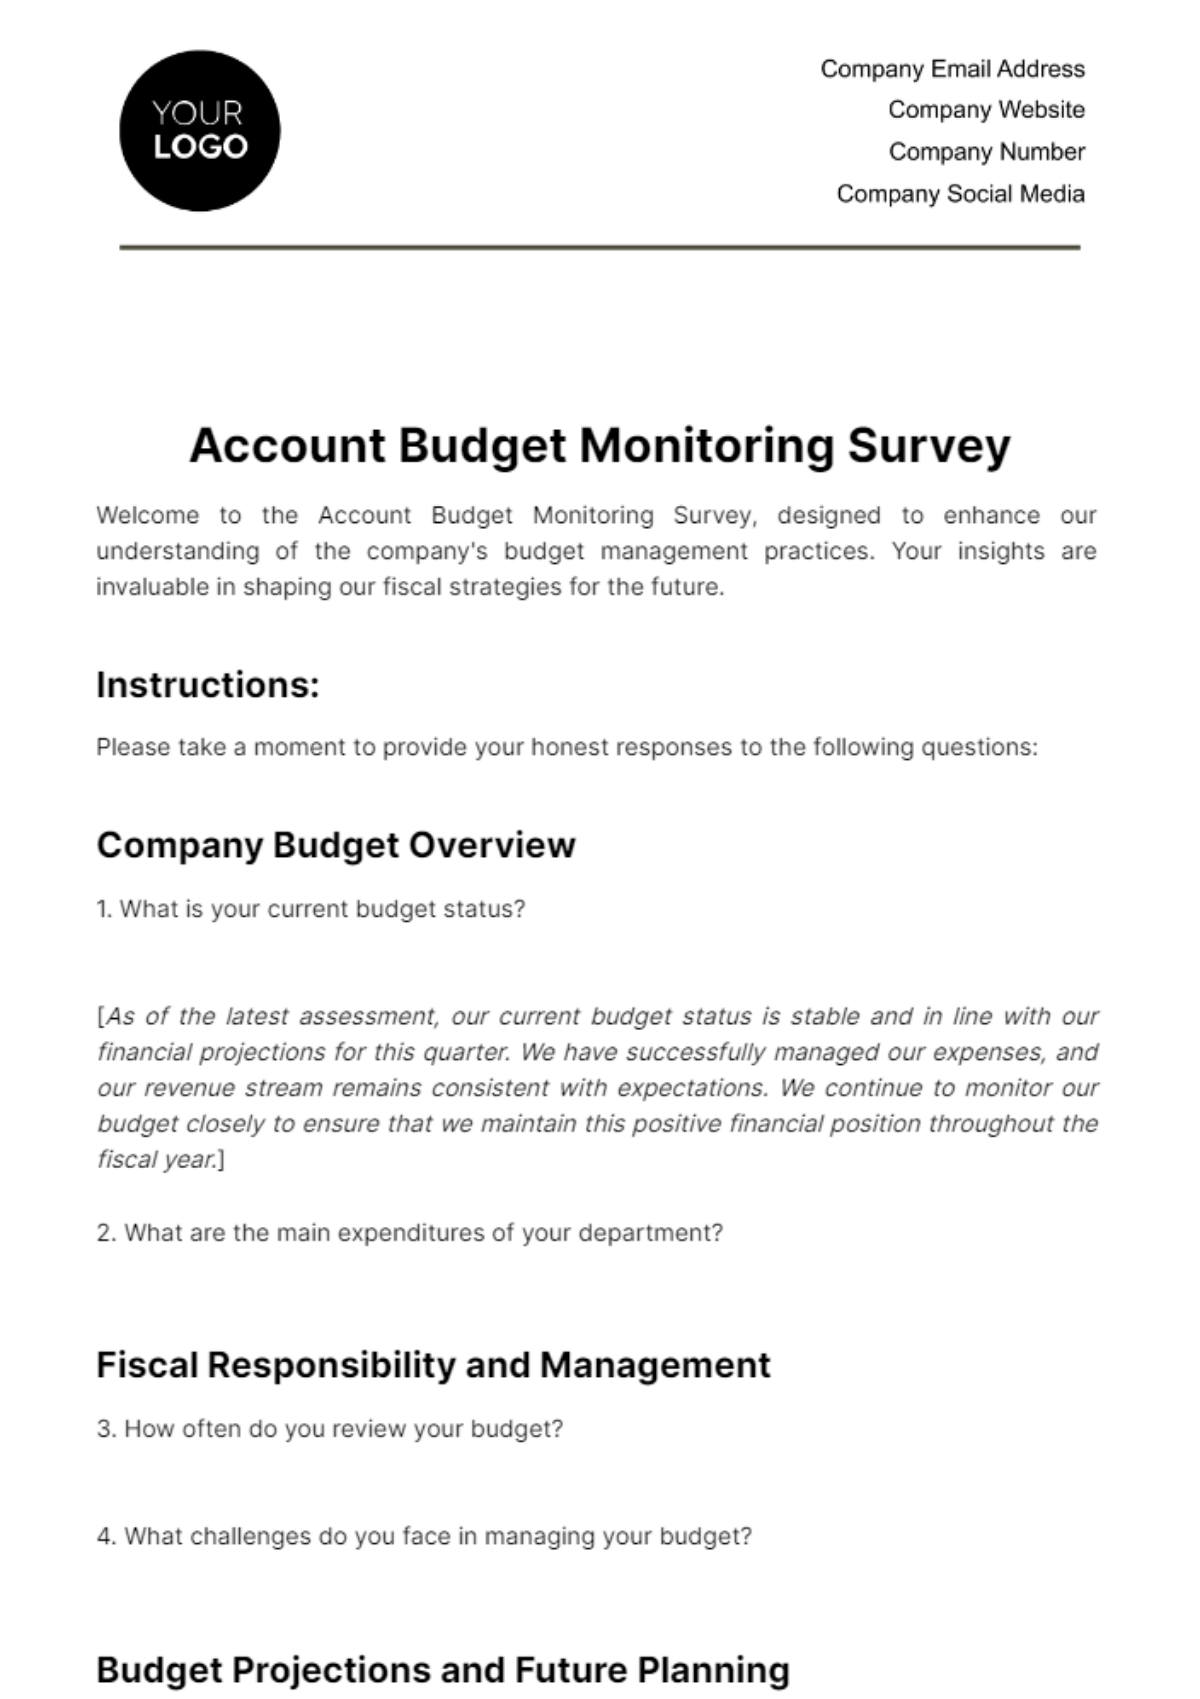 Free Account Budget Monitoring Survey Template